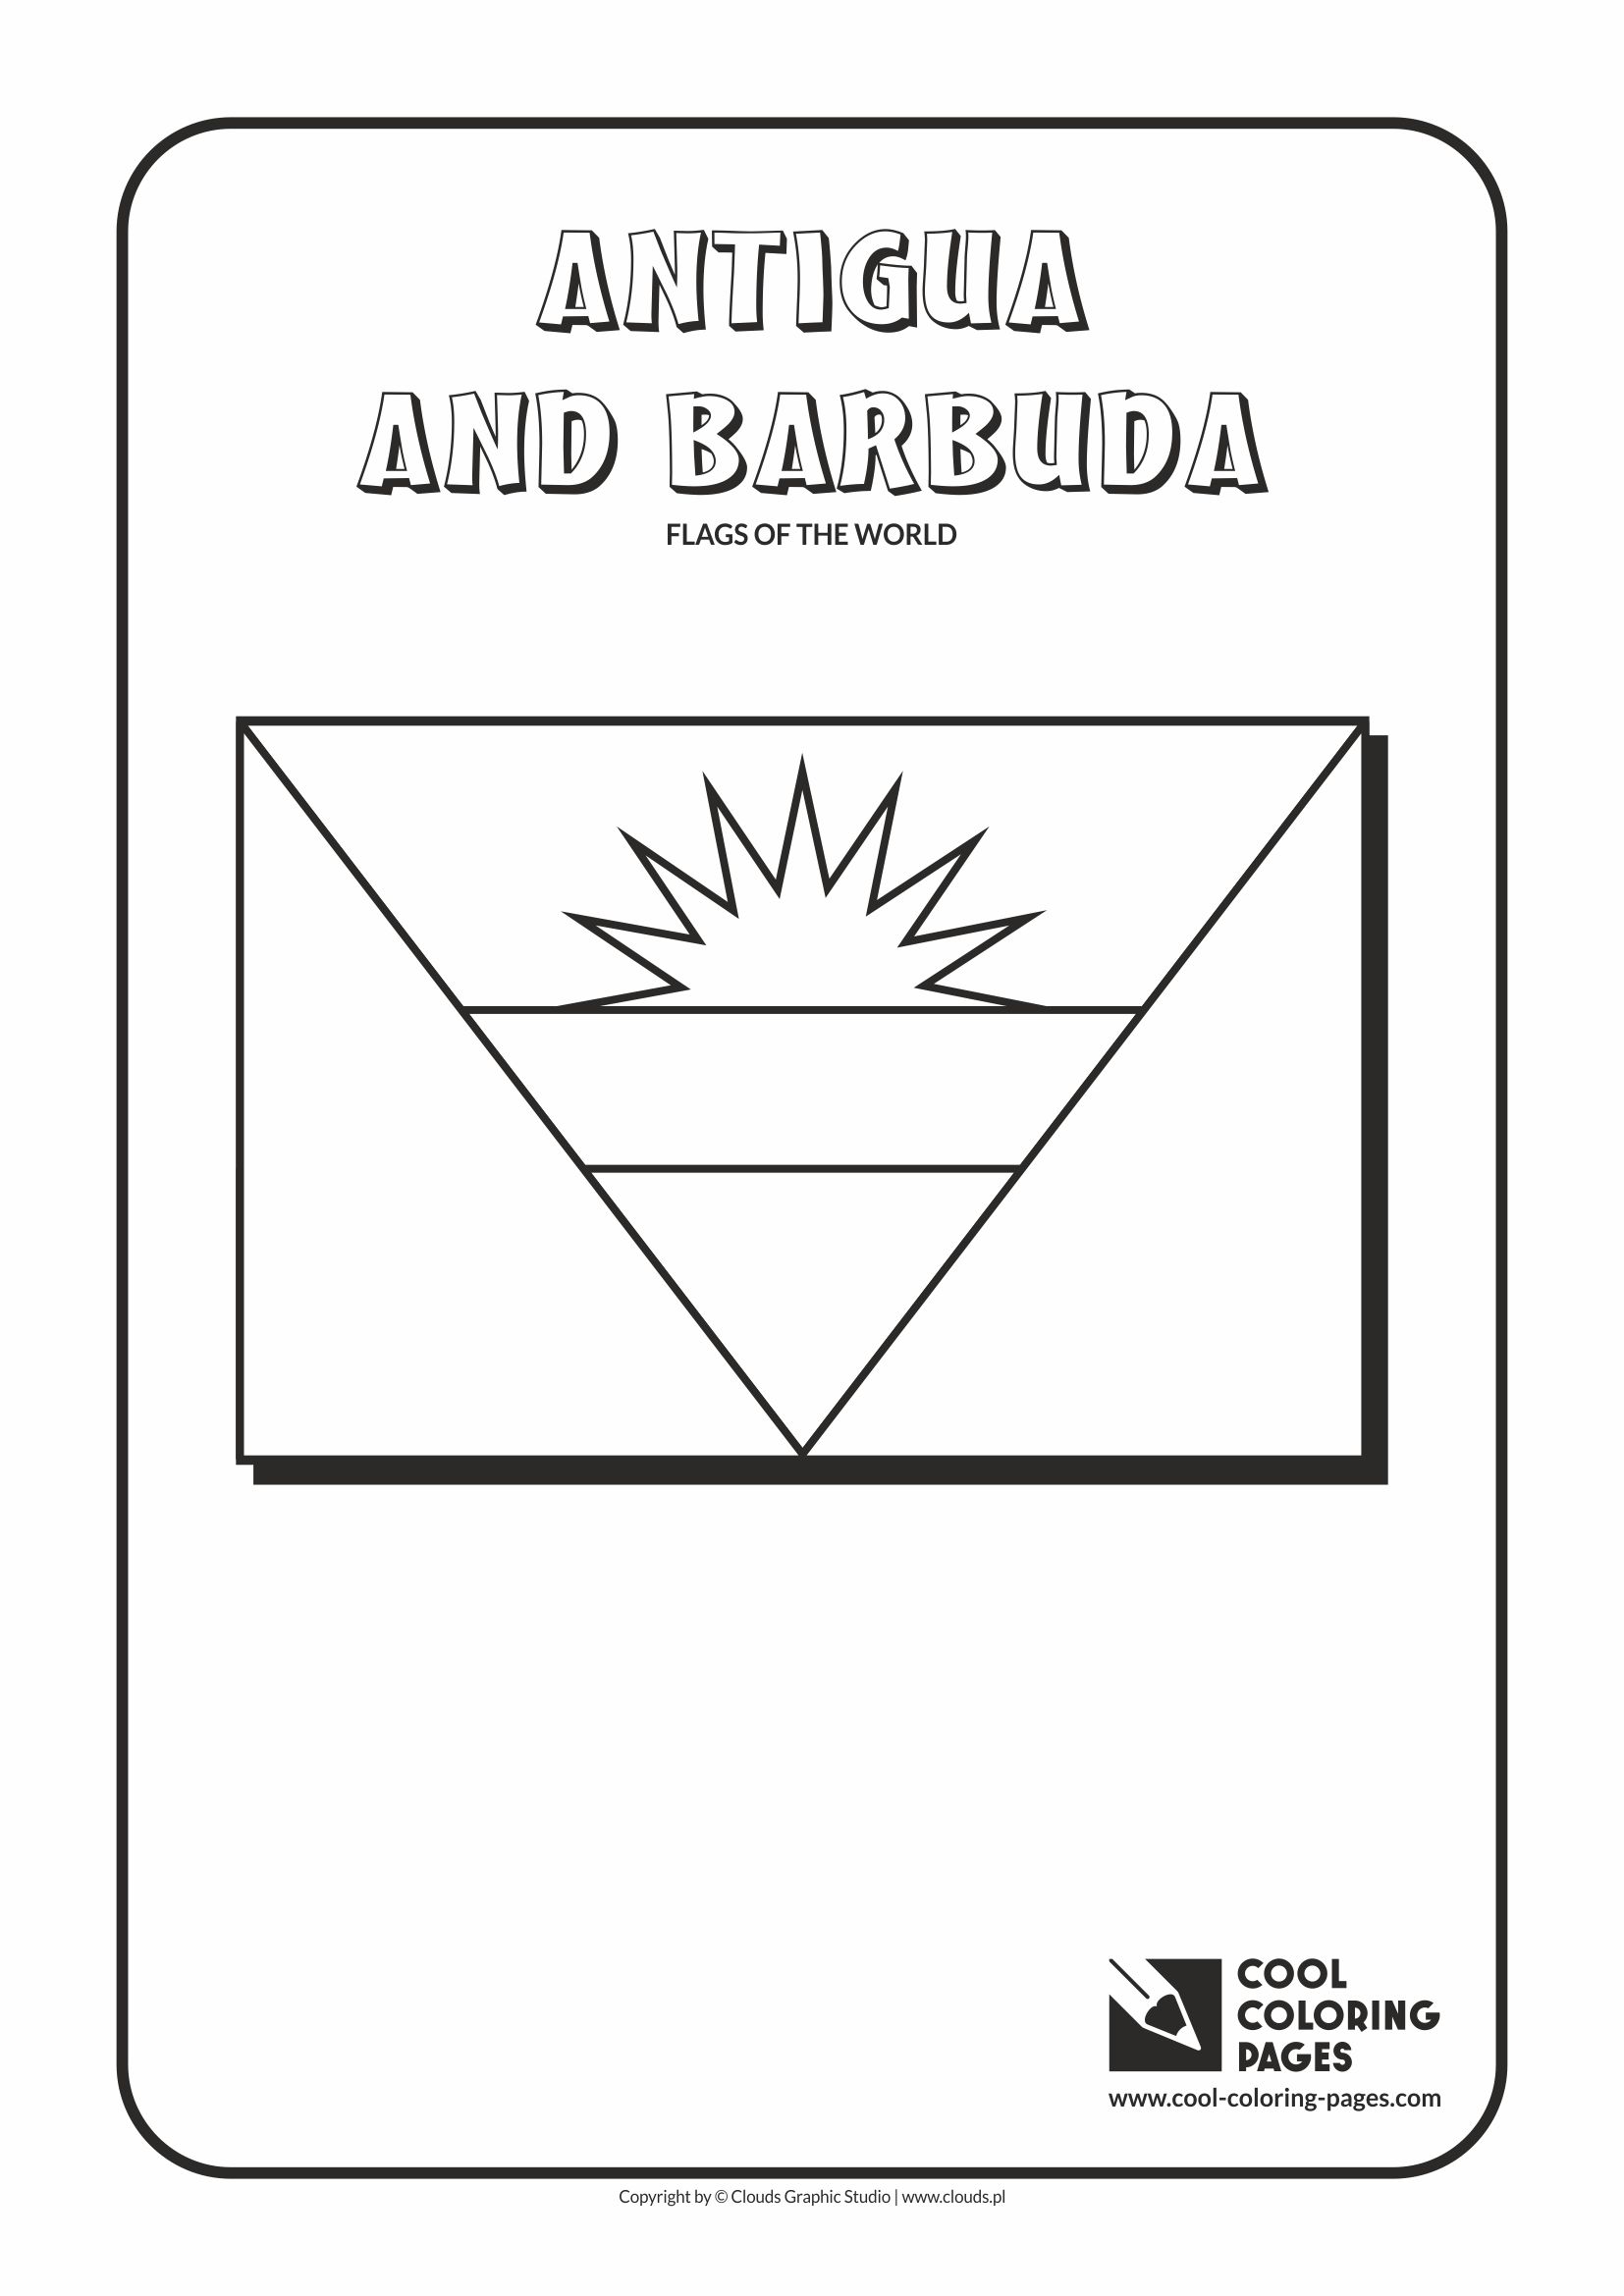 Cool Coloring Pages - Flags of the world / Antiqua and barbuda flag